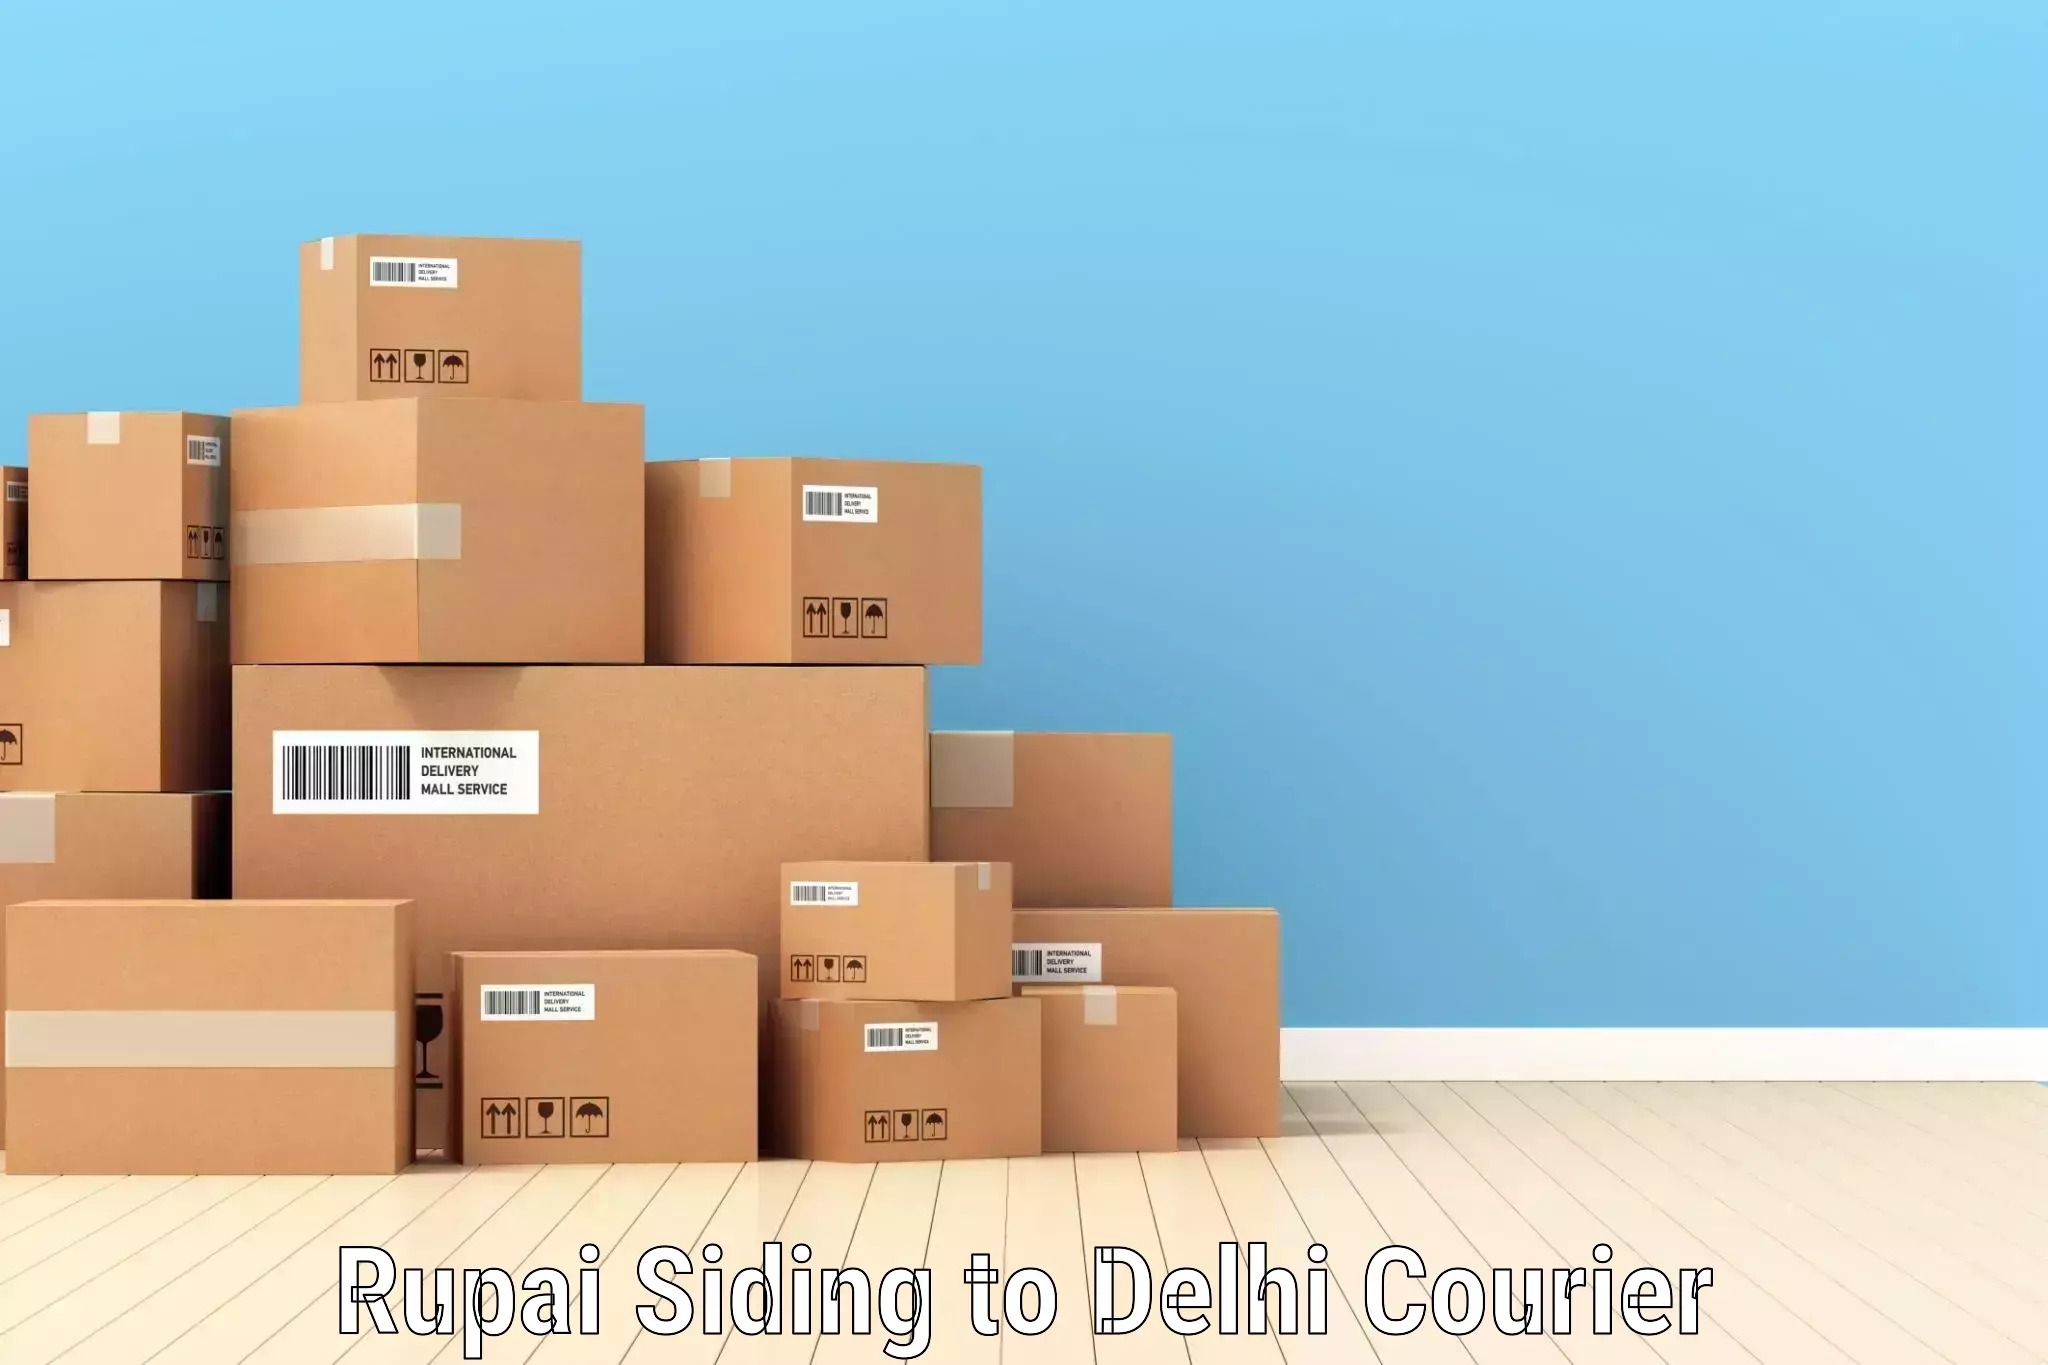 Cash on delivery service Rupai Siding to Jhilmil